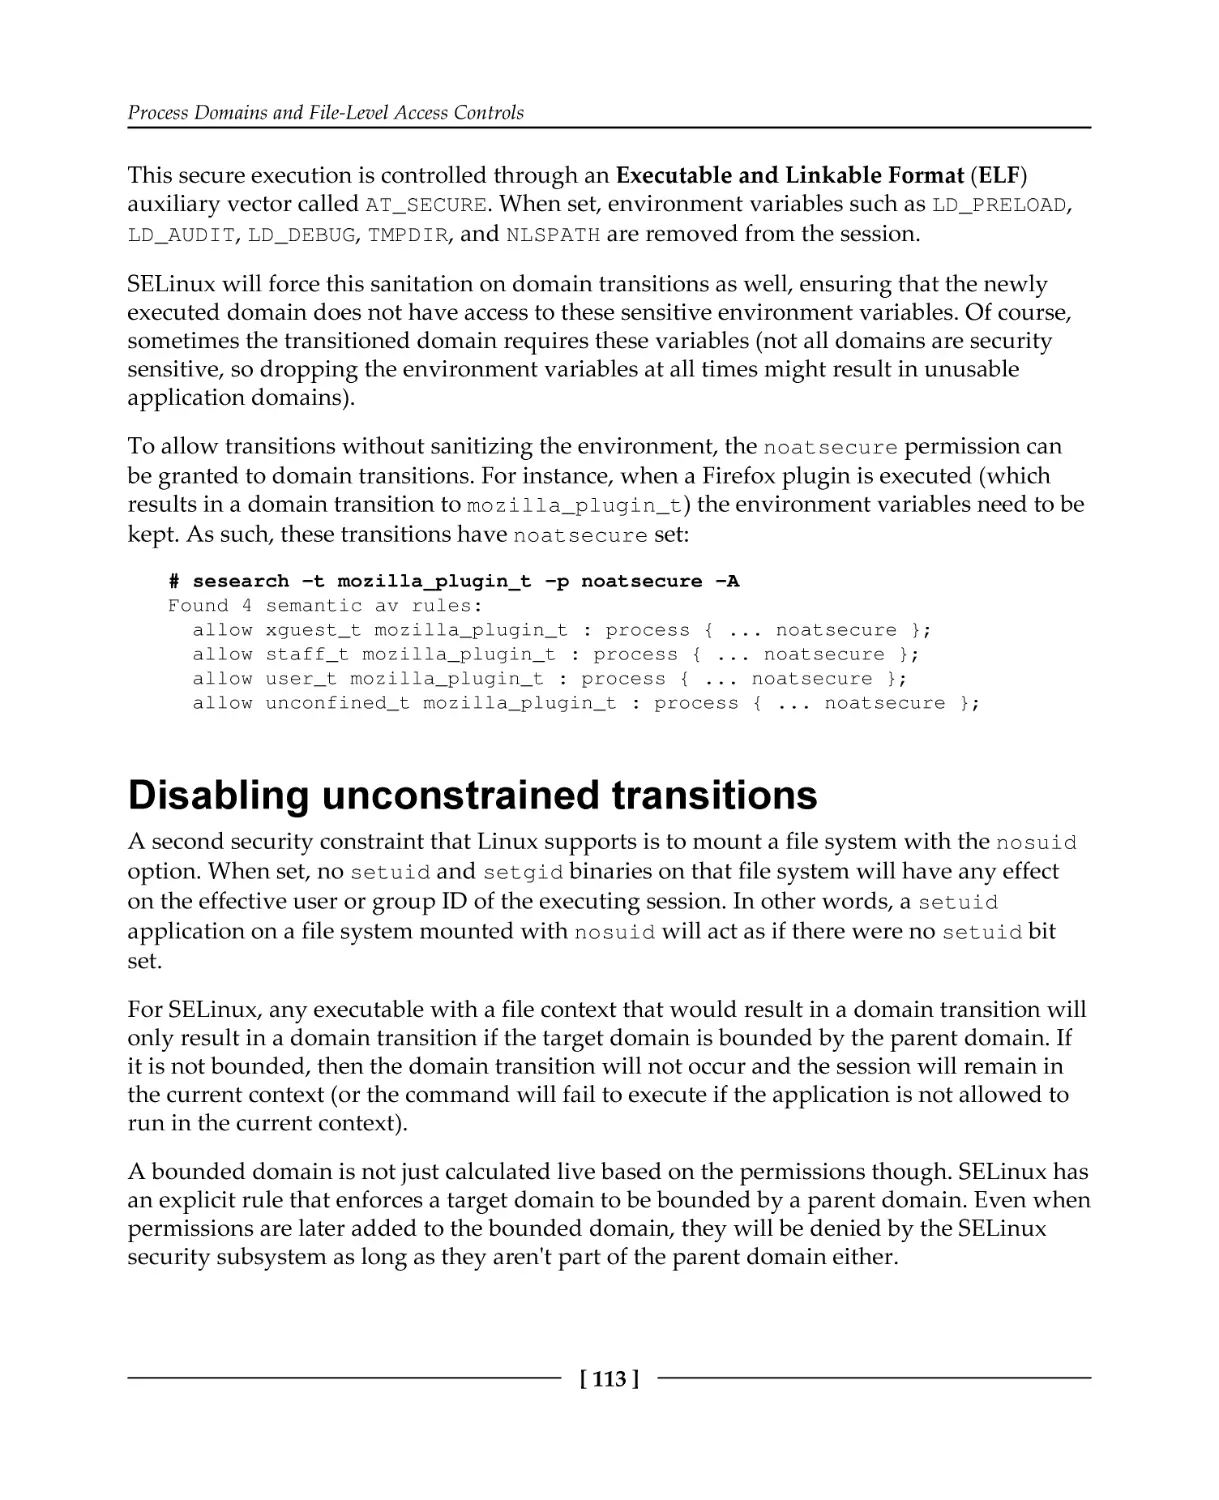 Disabling unconstrained transitions